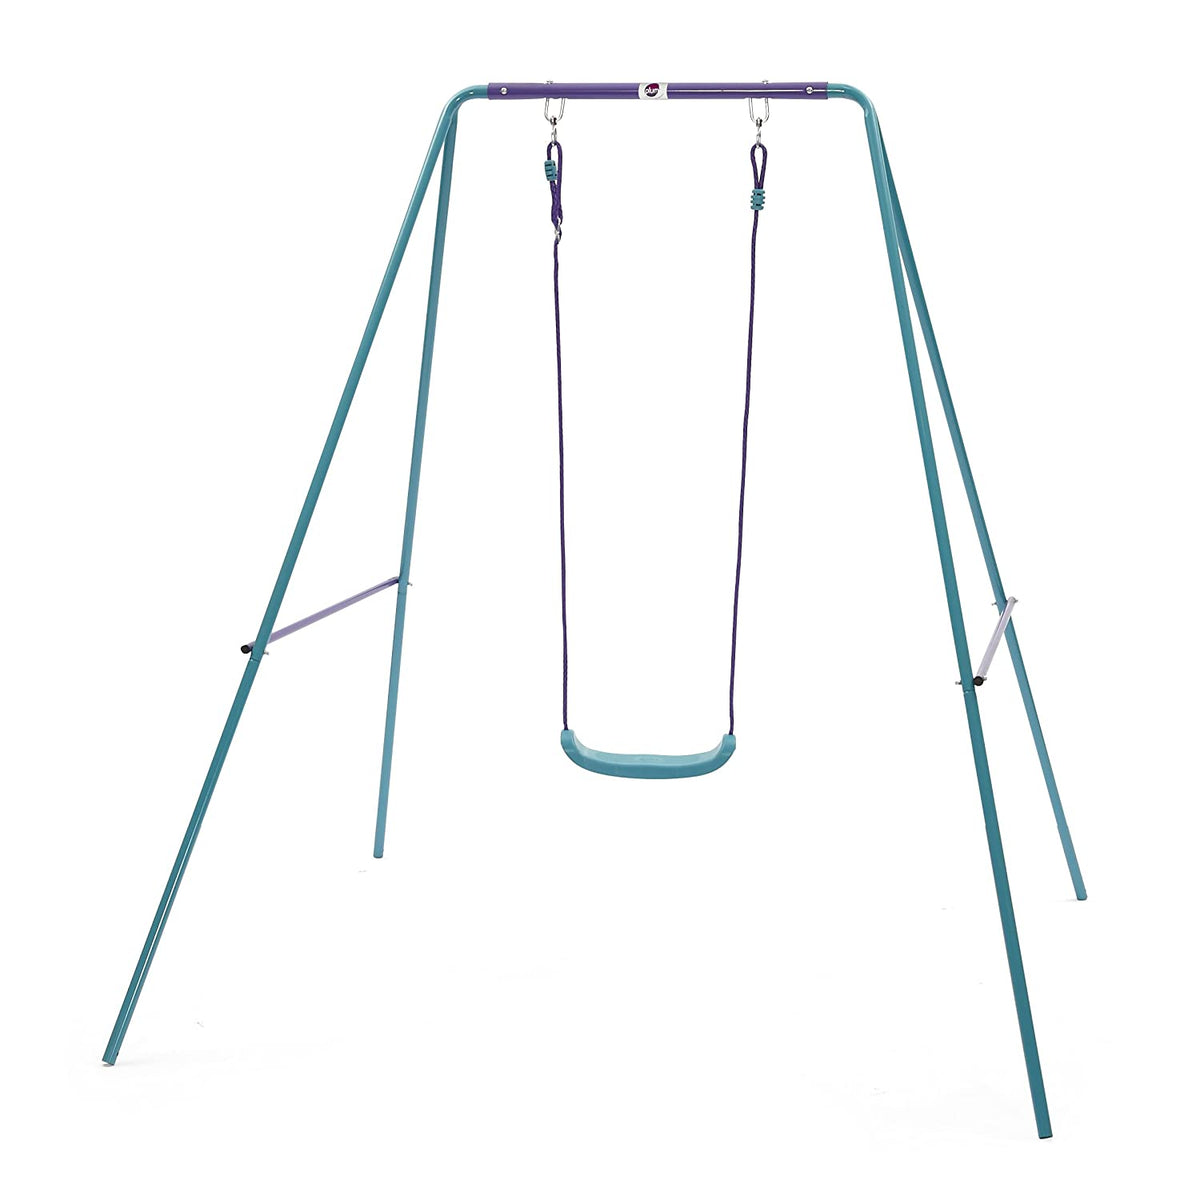 Plum Classic Metal Swing Set for Kids Ages 2-5 Years